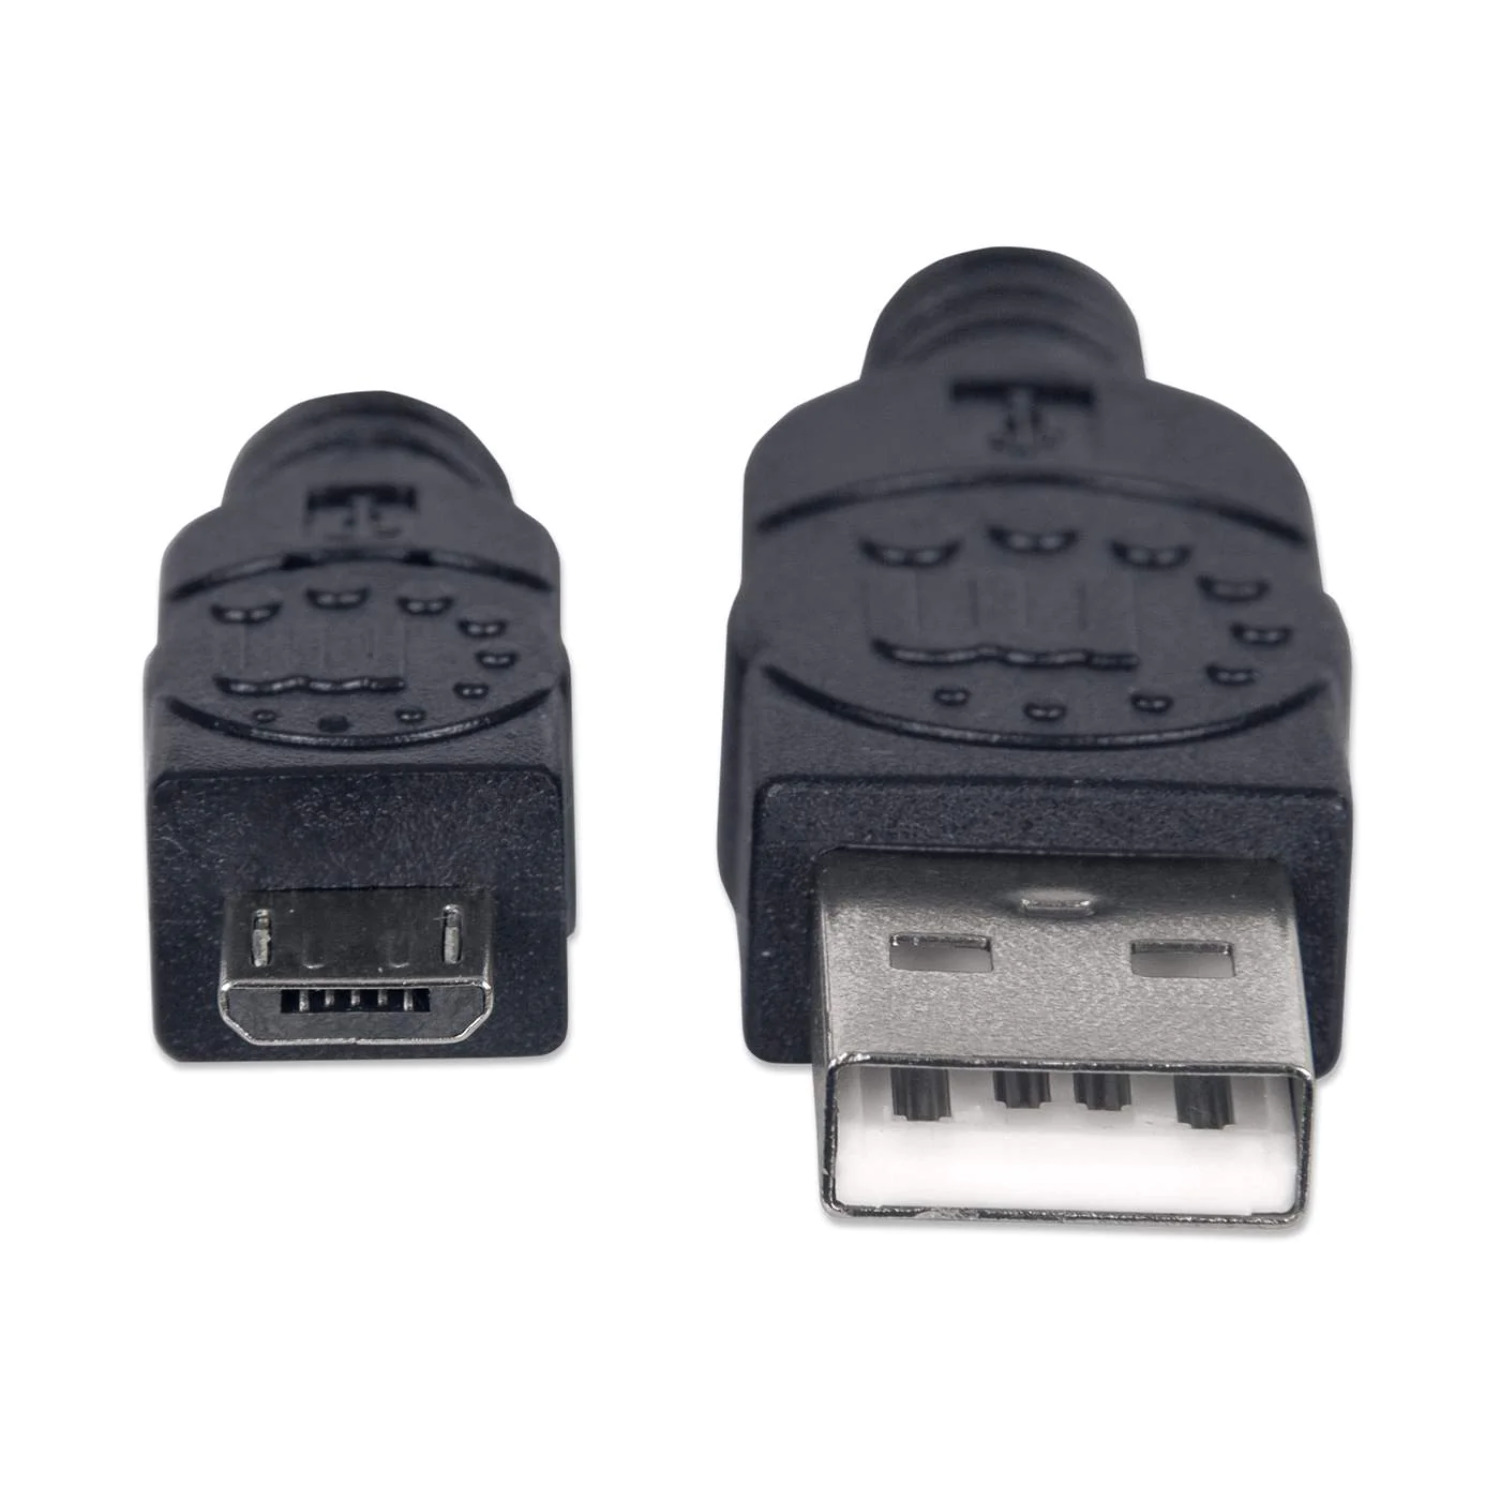 Manhattan Hi-Speed USB Micro-B Device Cable USB 2.0, Type-A Male to Micro-B Male, 480 Mbps, 6 ft., Black - image 3 of 3